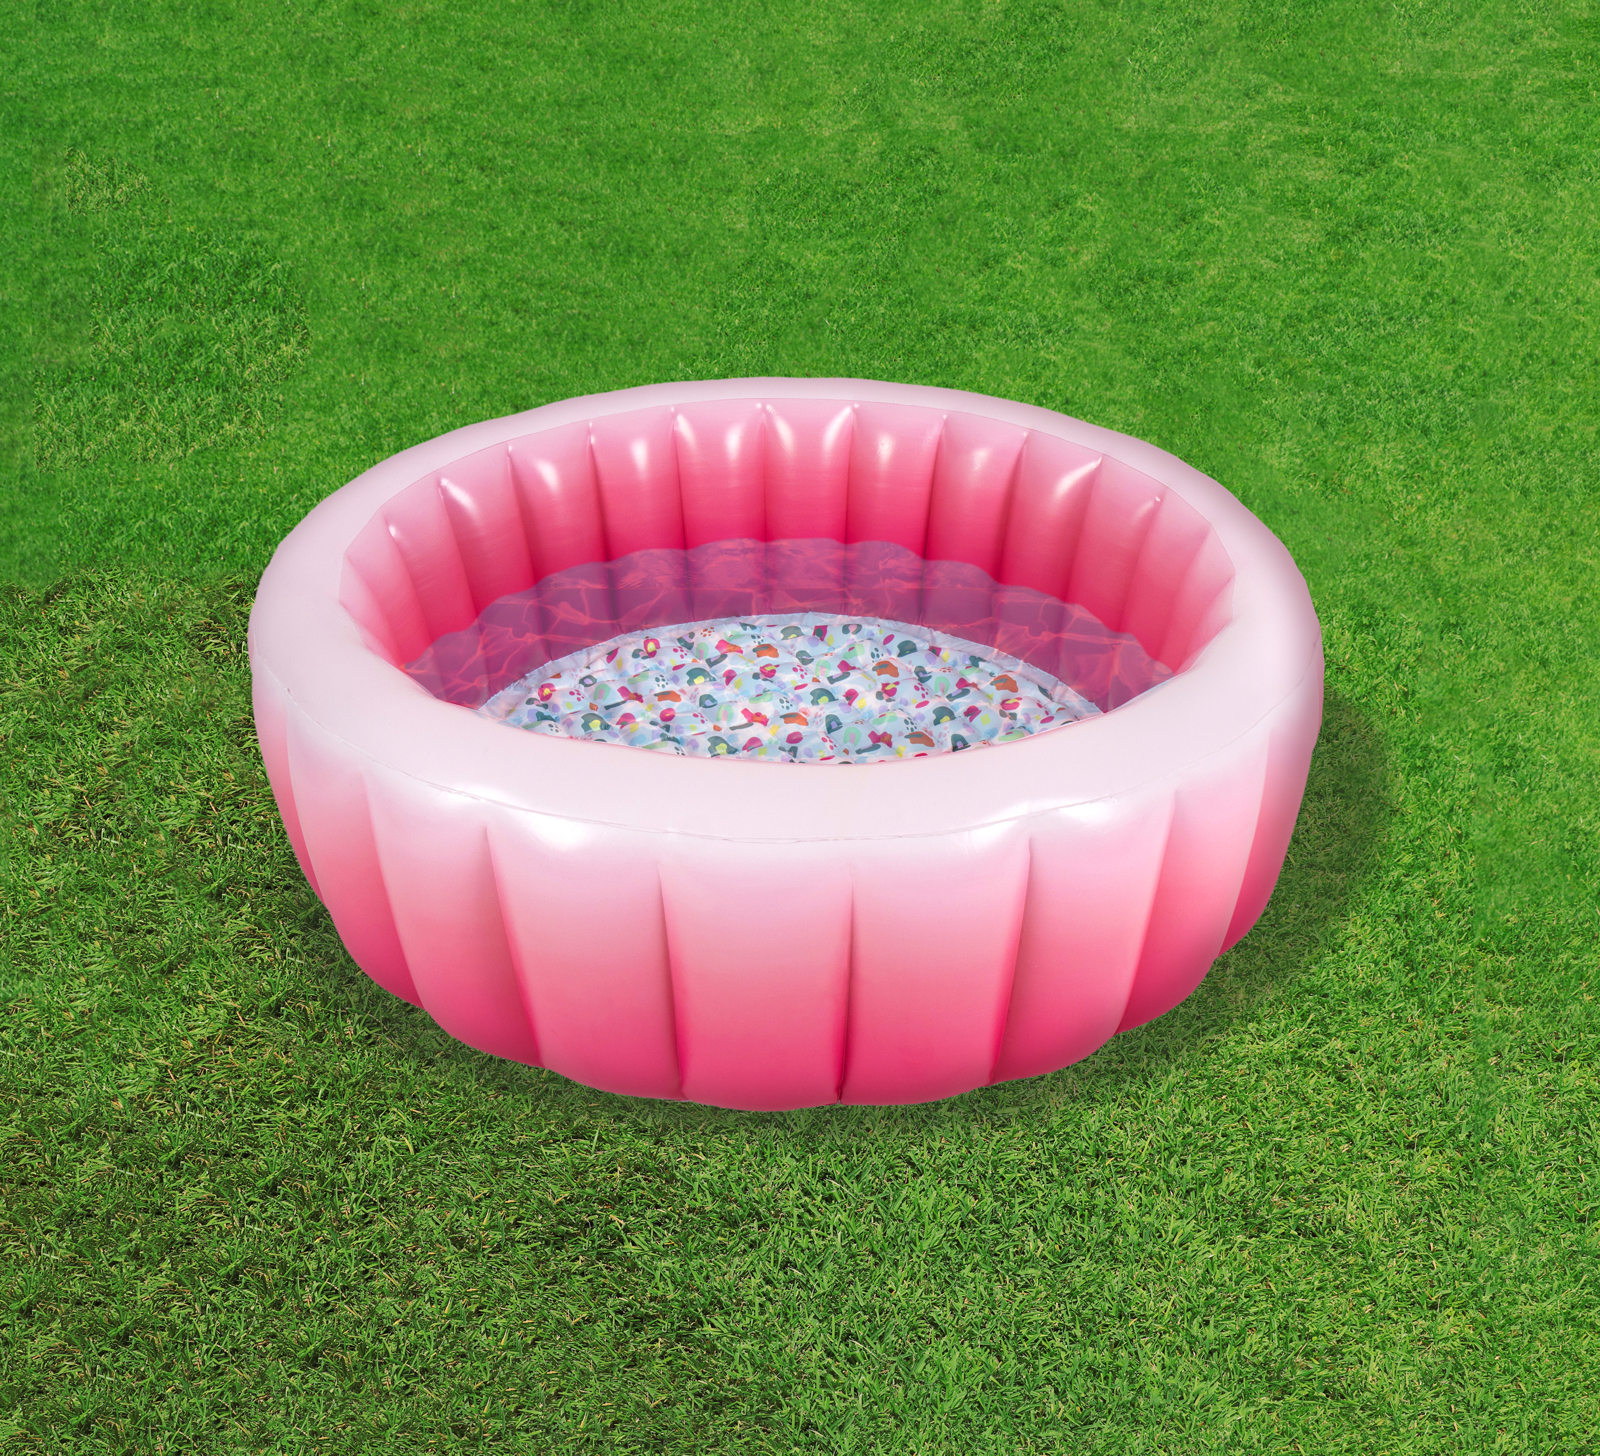 Packed Party Luxe Pink Ombre 59” Round Soft-Sided 3-Ring Inflatable Swimming Pool - image 4 of 5